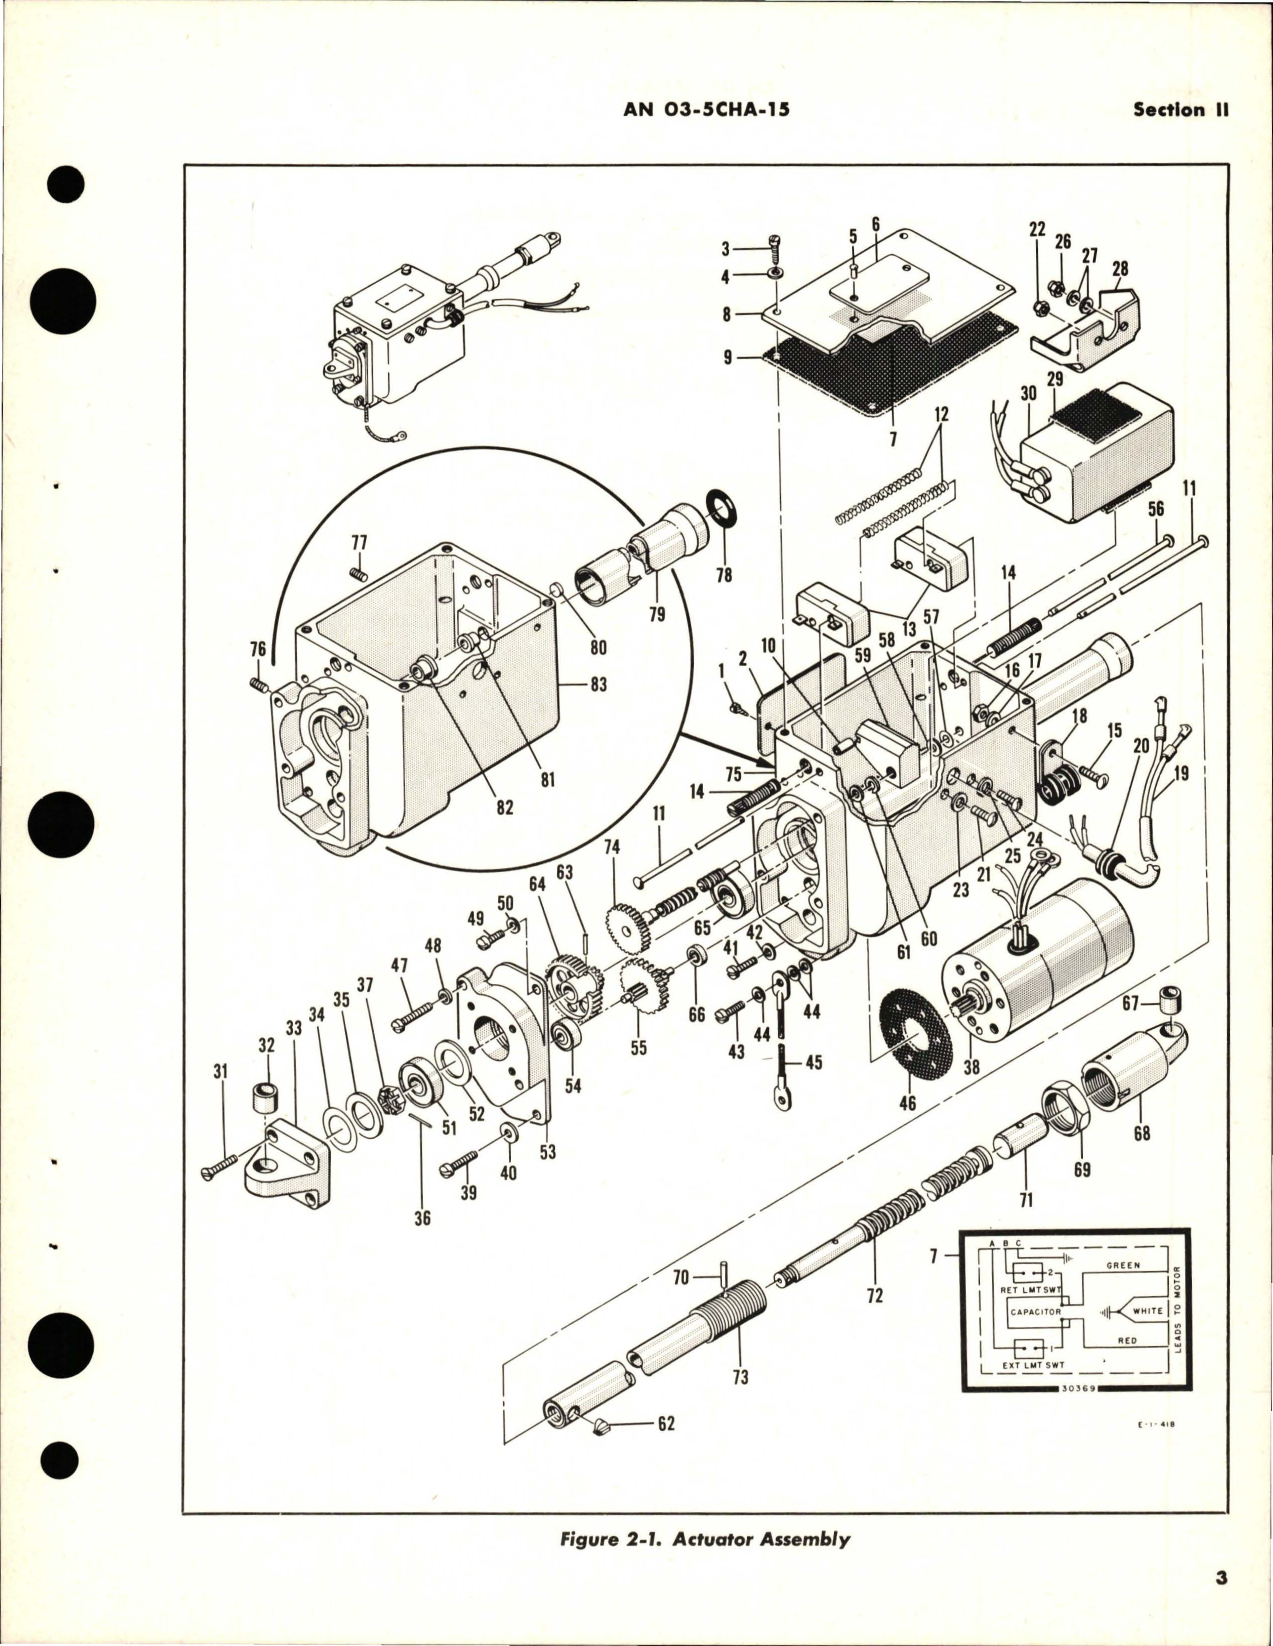 Sample page 7 from AirCorps Library document: Overhaul Instructions for Electromechanical Linear Actuators